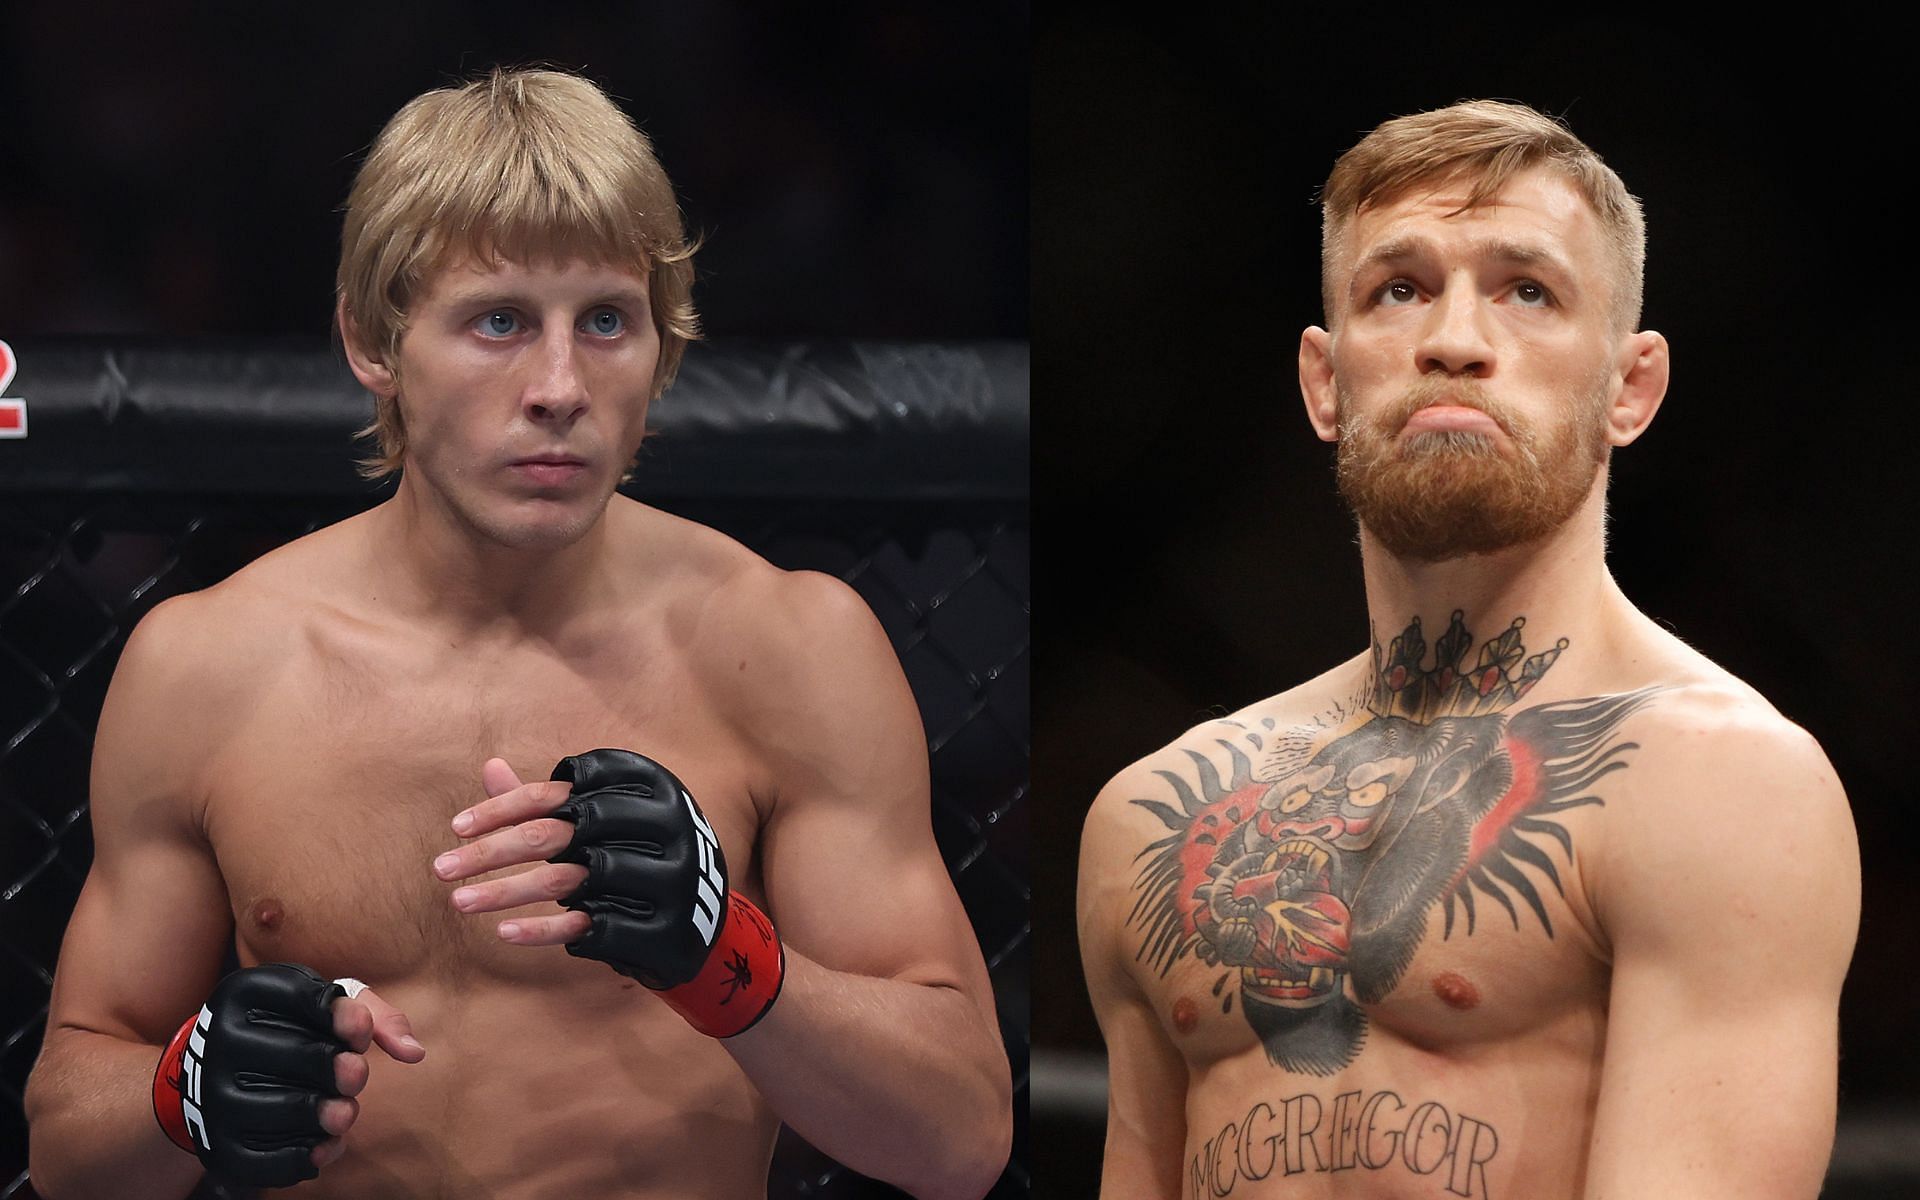 Paddy Pimblett (left) and Conor McGregor (right). [via Getty Images]